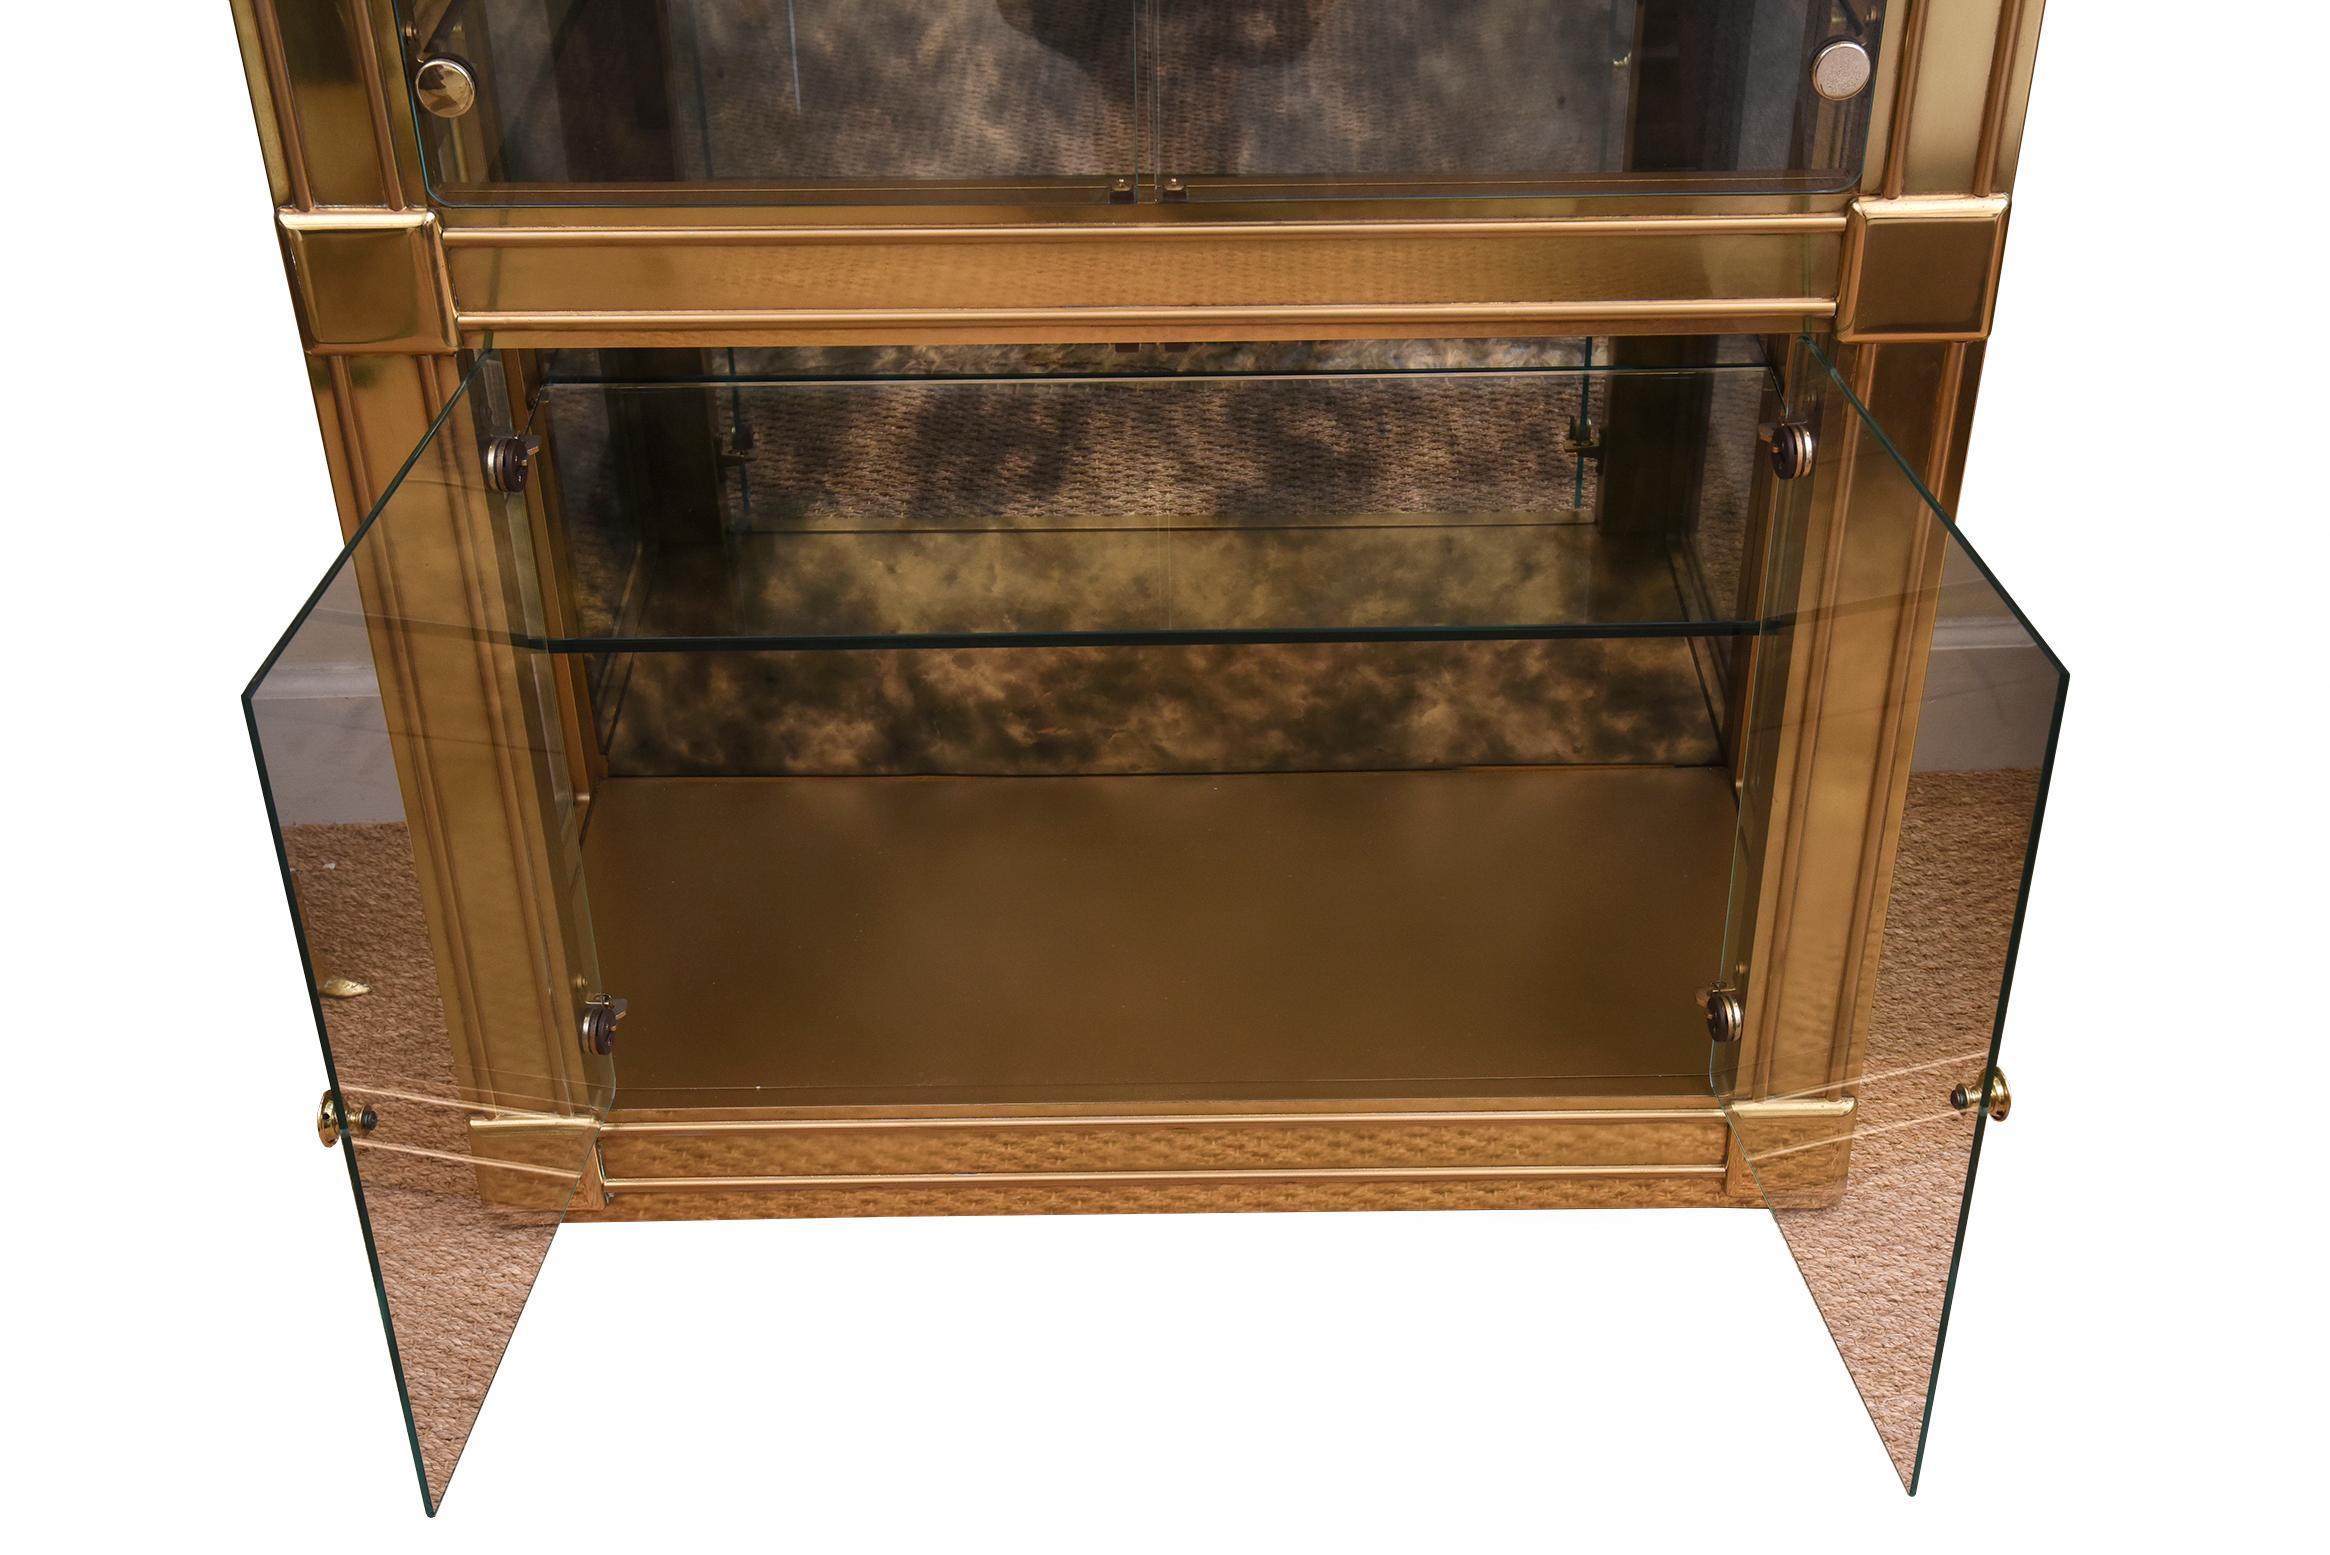 Pair of Mastercraft Palladian Style Brass and Glass Vitrines or Dry Bar Cabinets 1